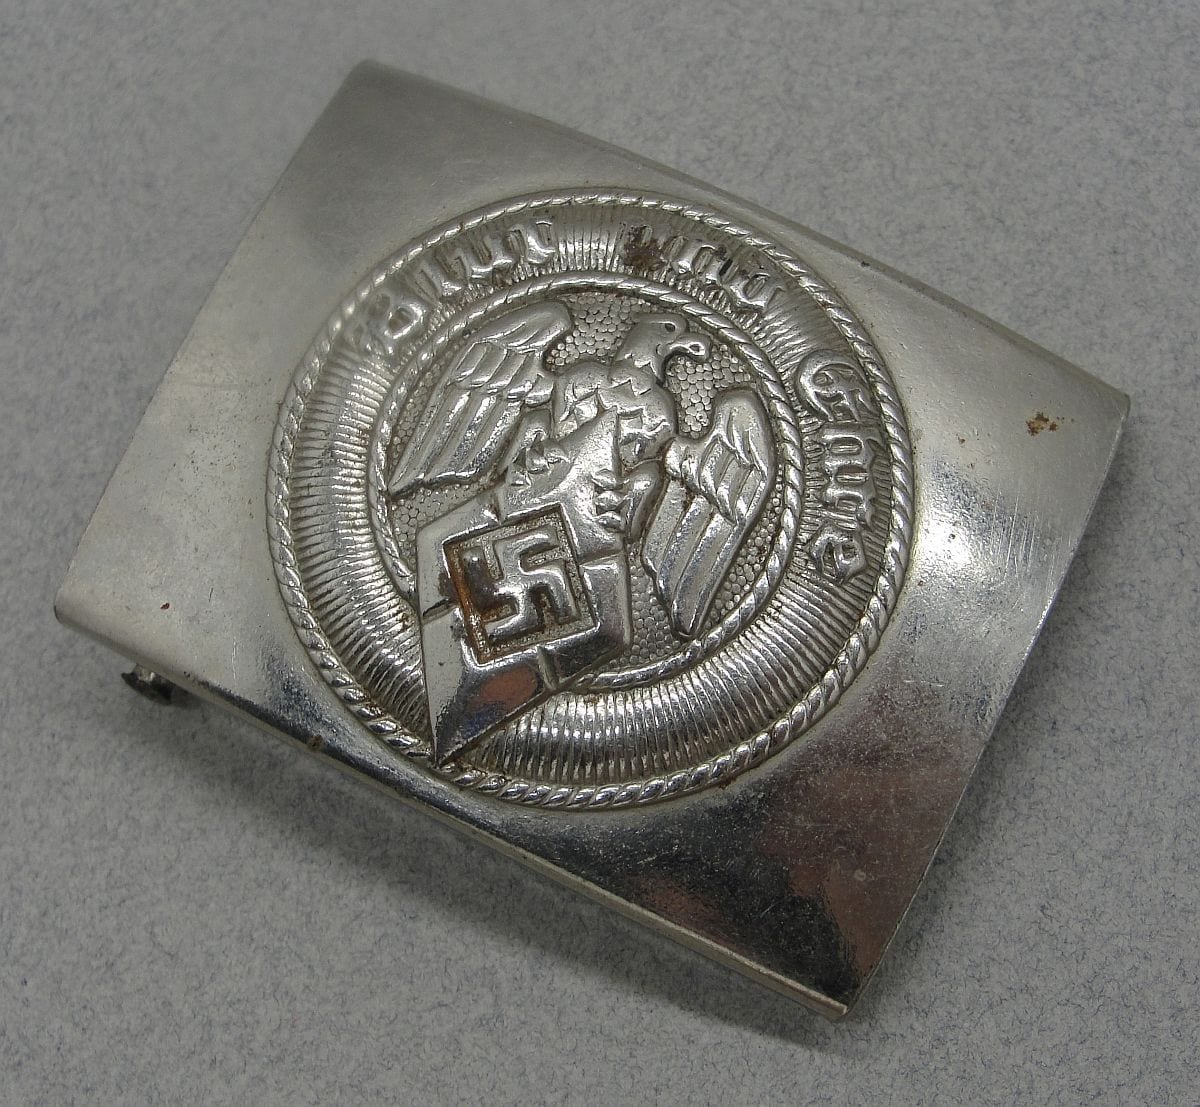 Hitler Youth Belt Buckle by "RZM M4/30"